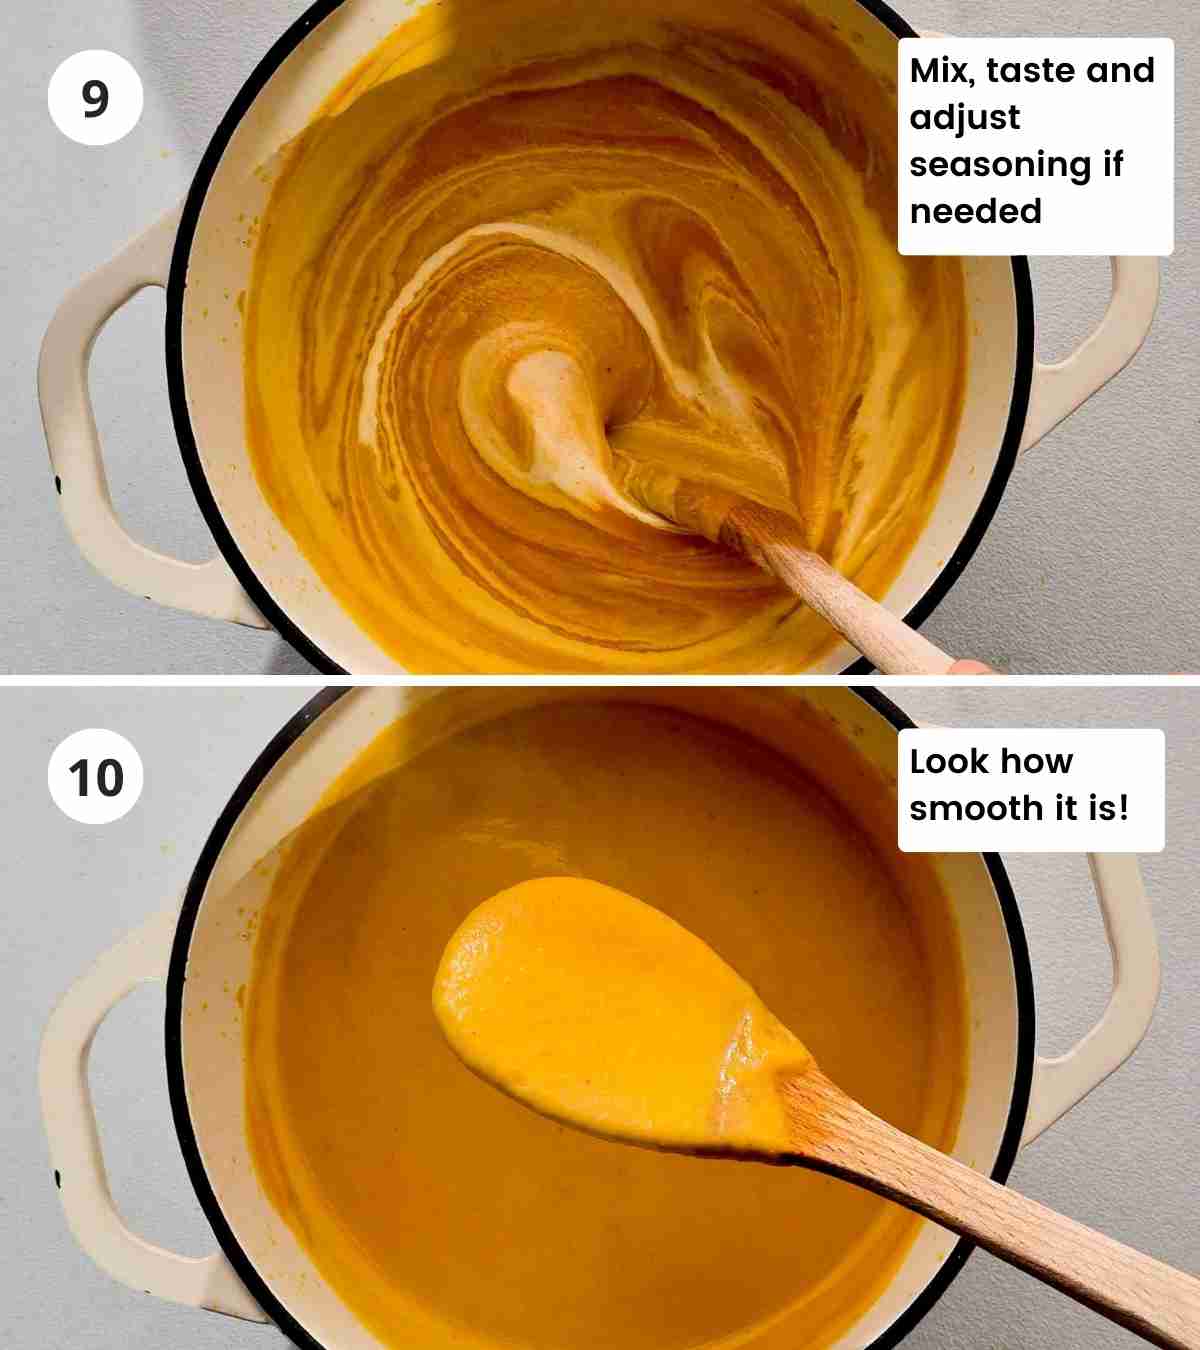 2 step instruction collage of mixing cream into the soup with captions